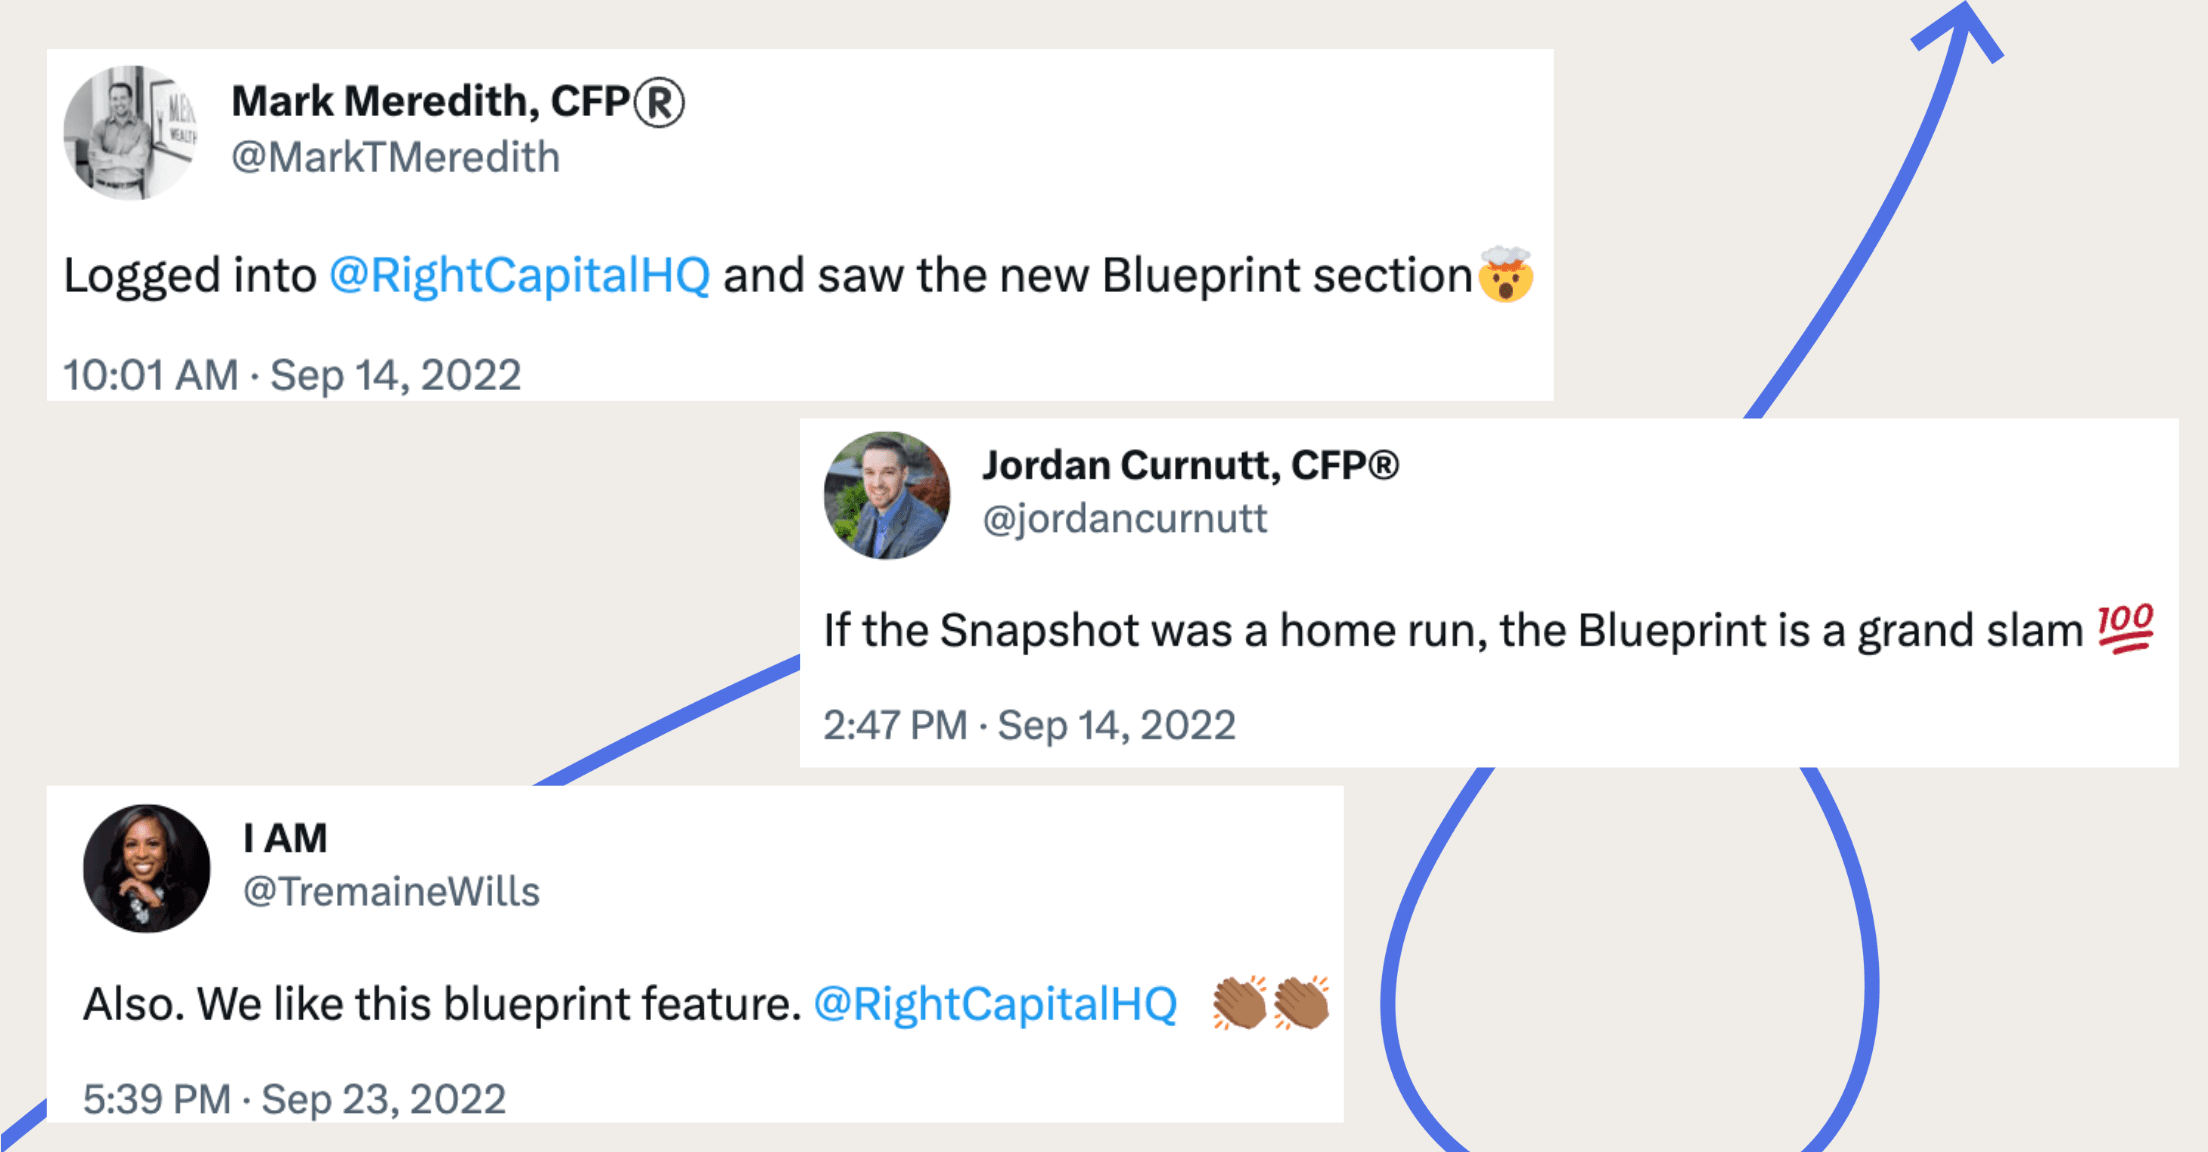 Tweets about how much advisors love the Blueprint feature within RightCapital